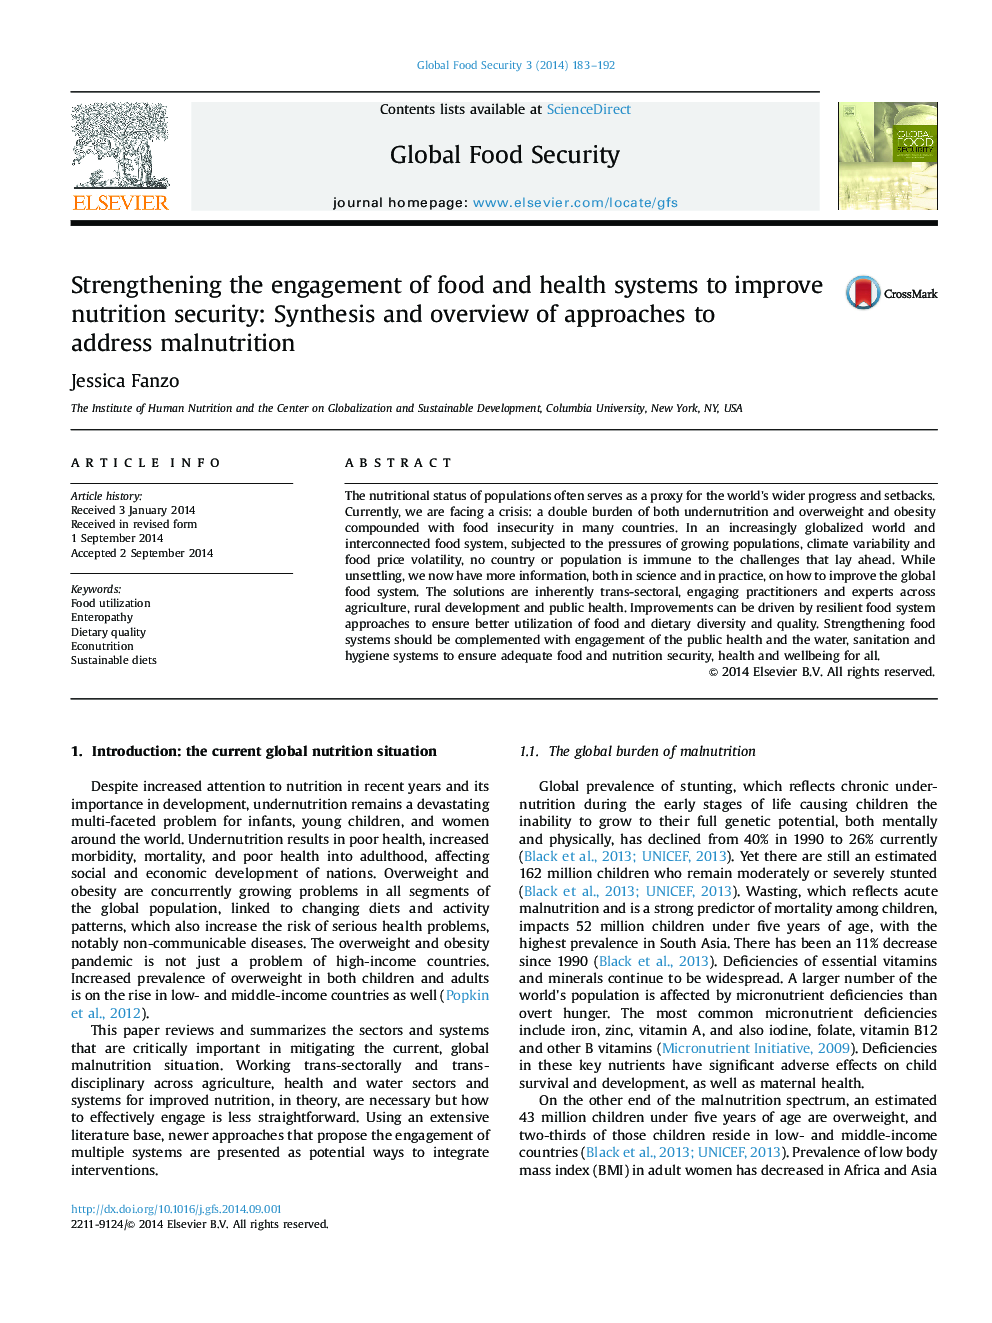 Strengthening the engagement of food and health systems to improve nutrition security: Synthesis and overview of approaches to address malnutrition